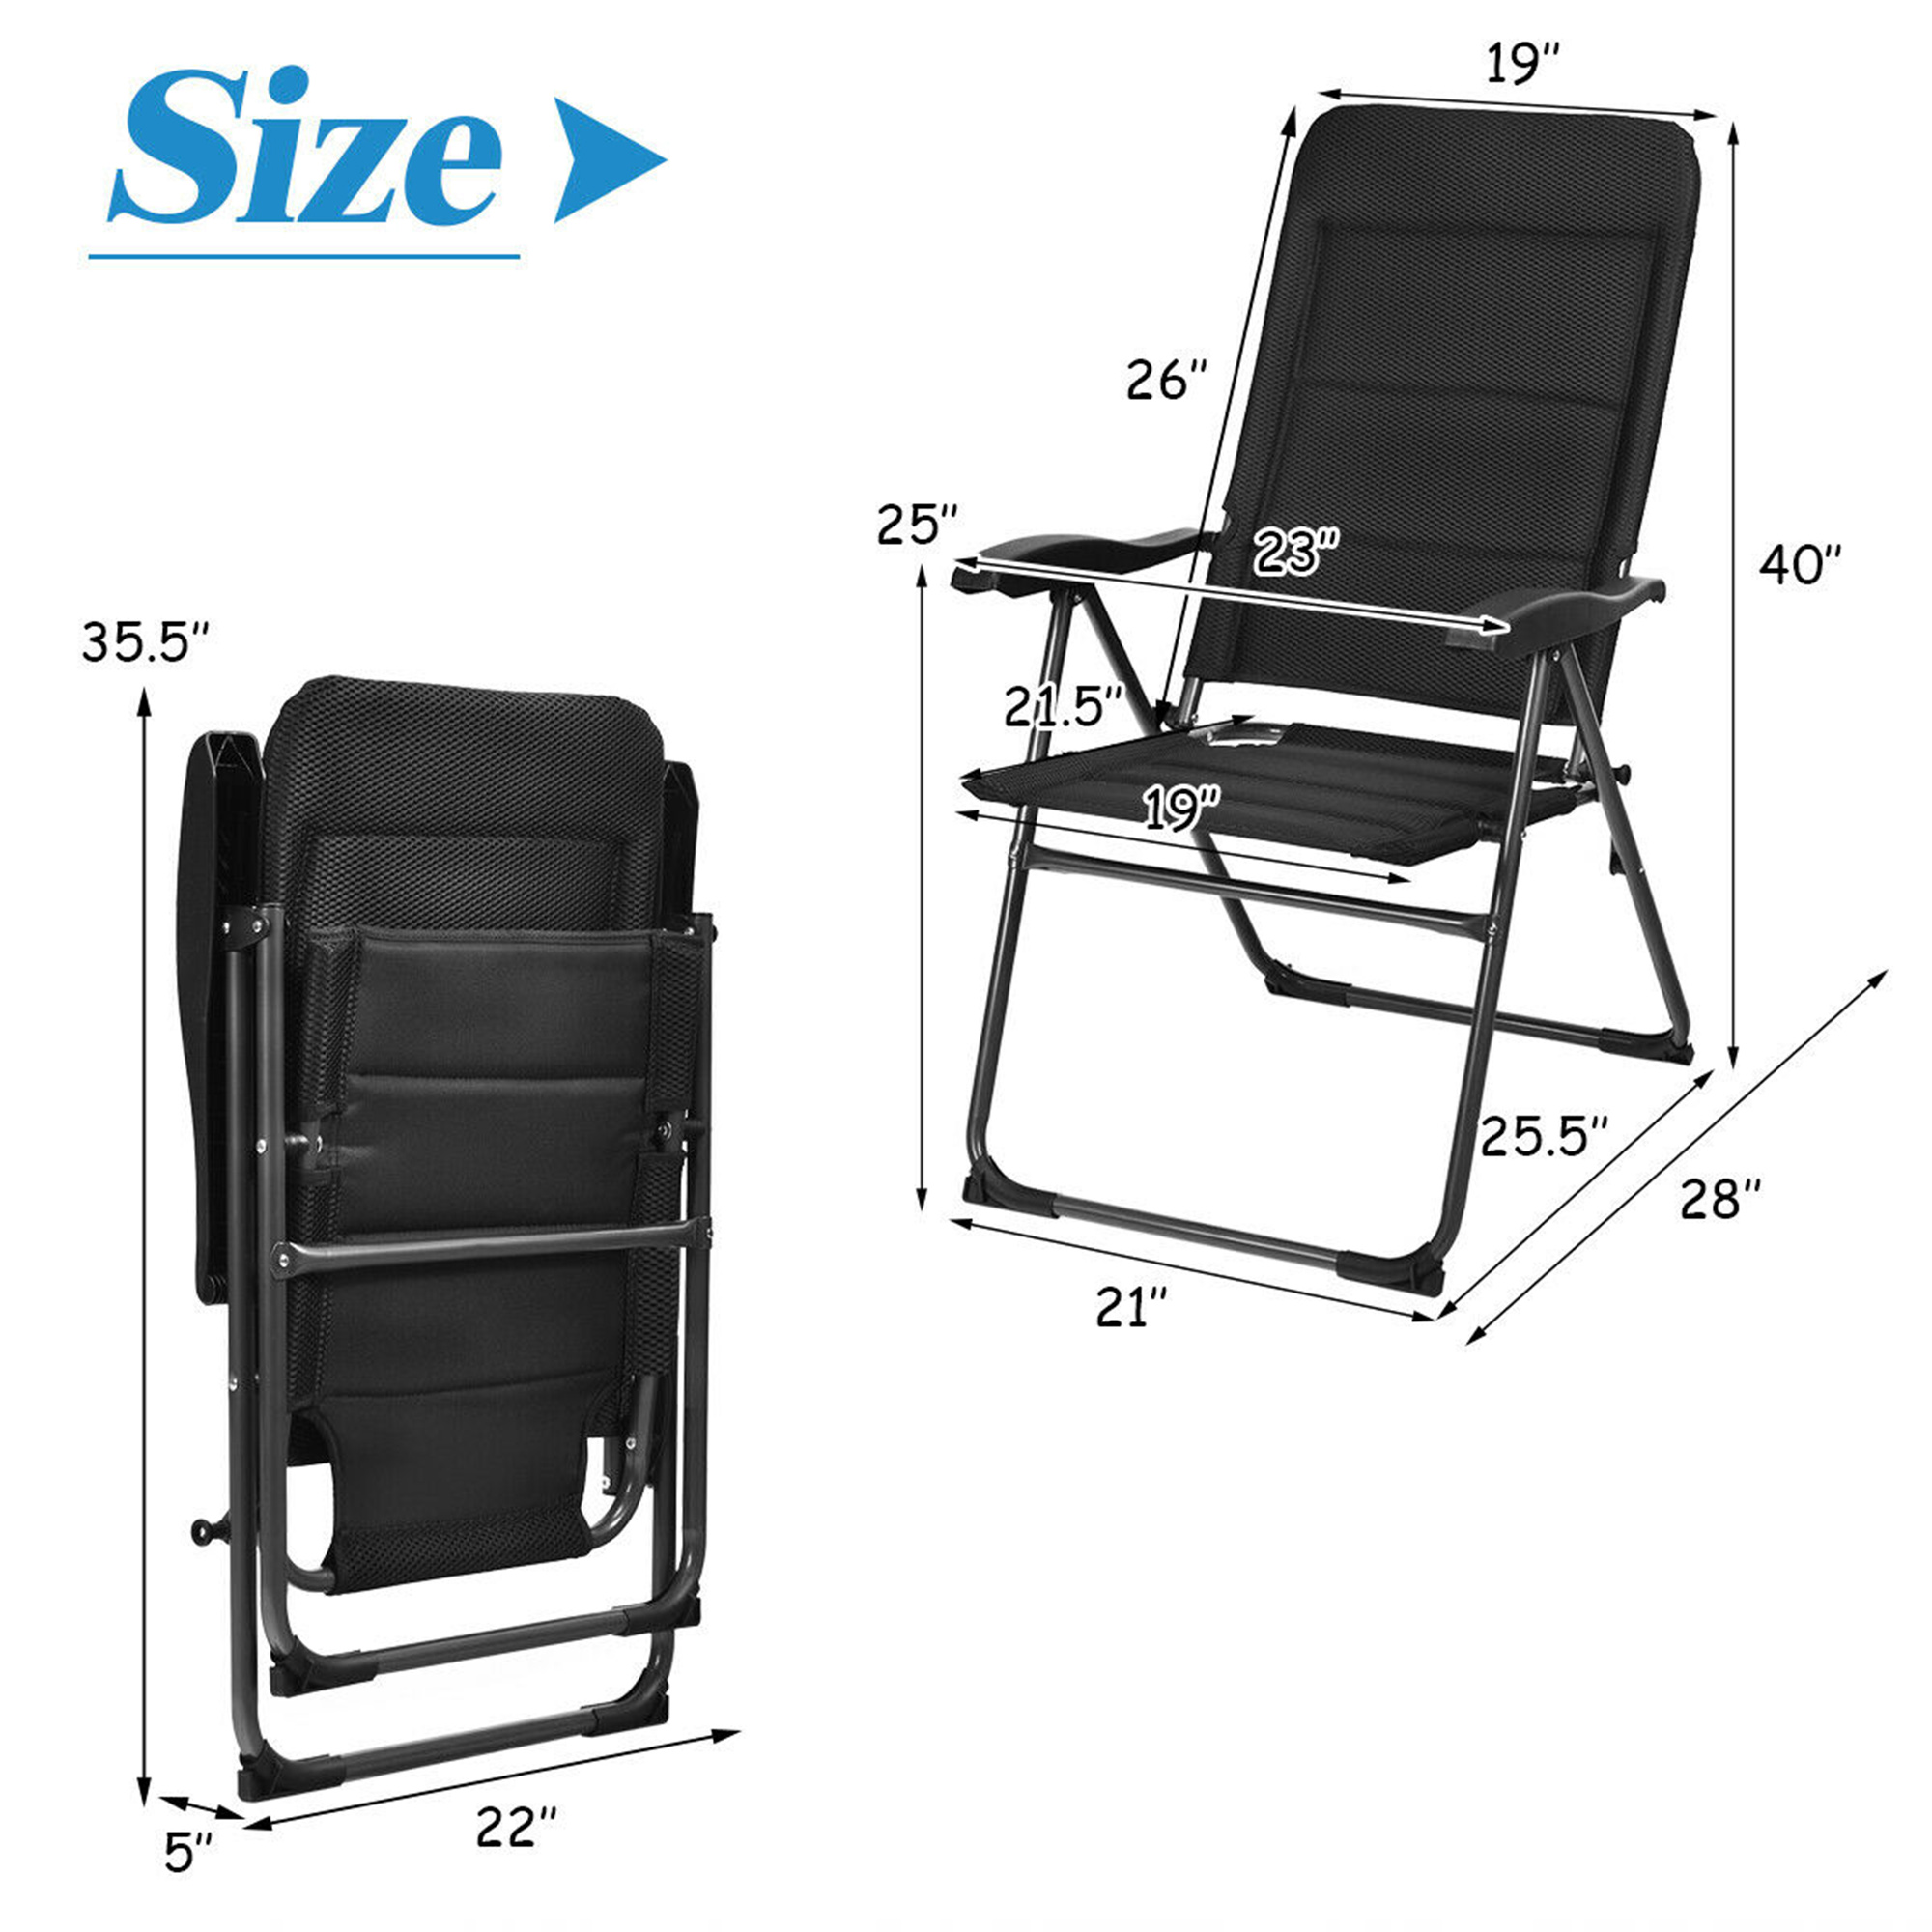 Costway 2PCS Patio Folding Chairs Back Adjustable Reclining Padded Garden Furniture